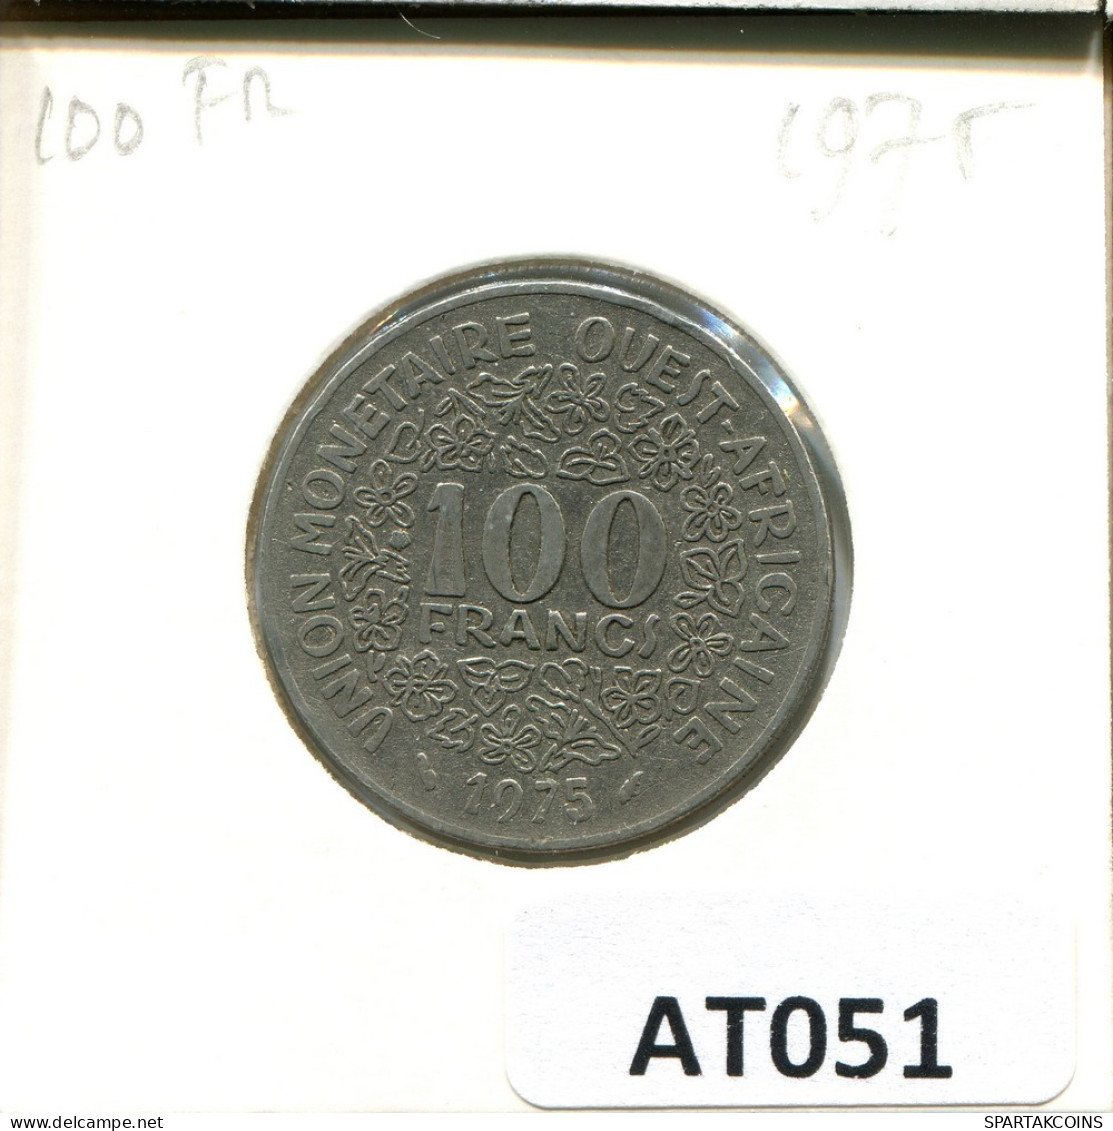 100 FRANCS CFA 1975 Western African States (BCEAO) Moneda #AT051.E.A - Otros – Africa